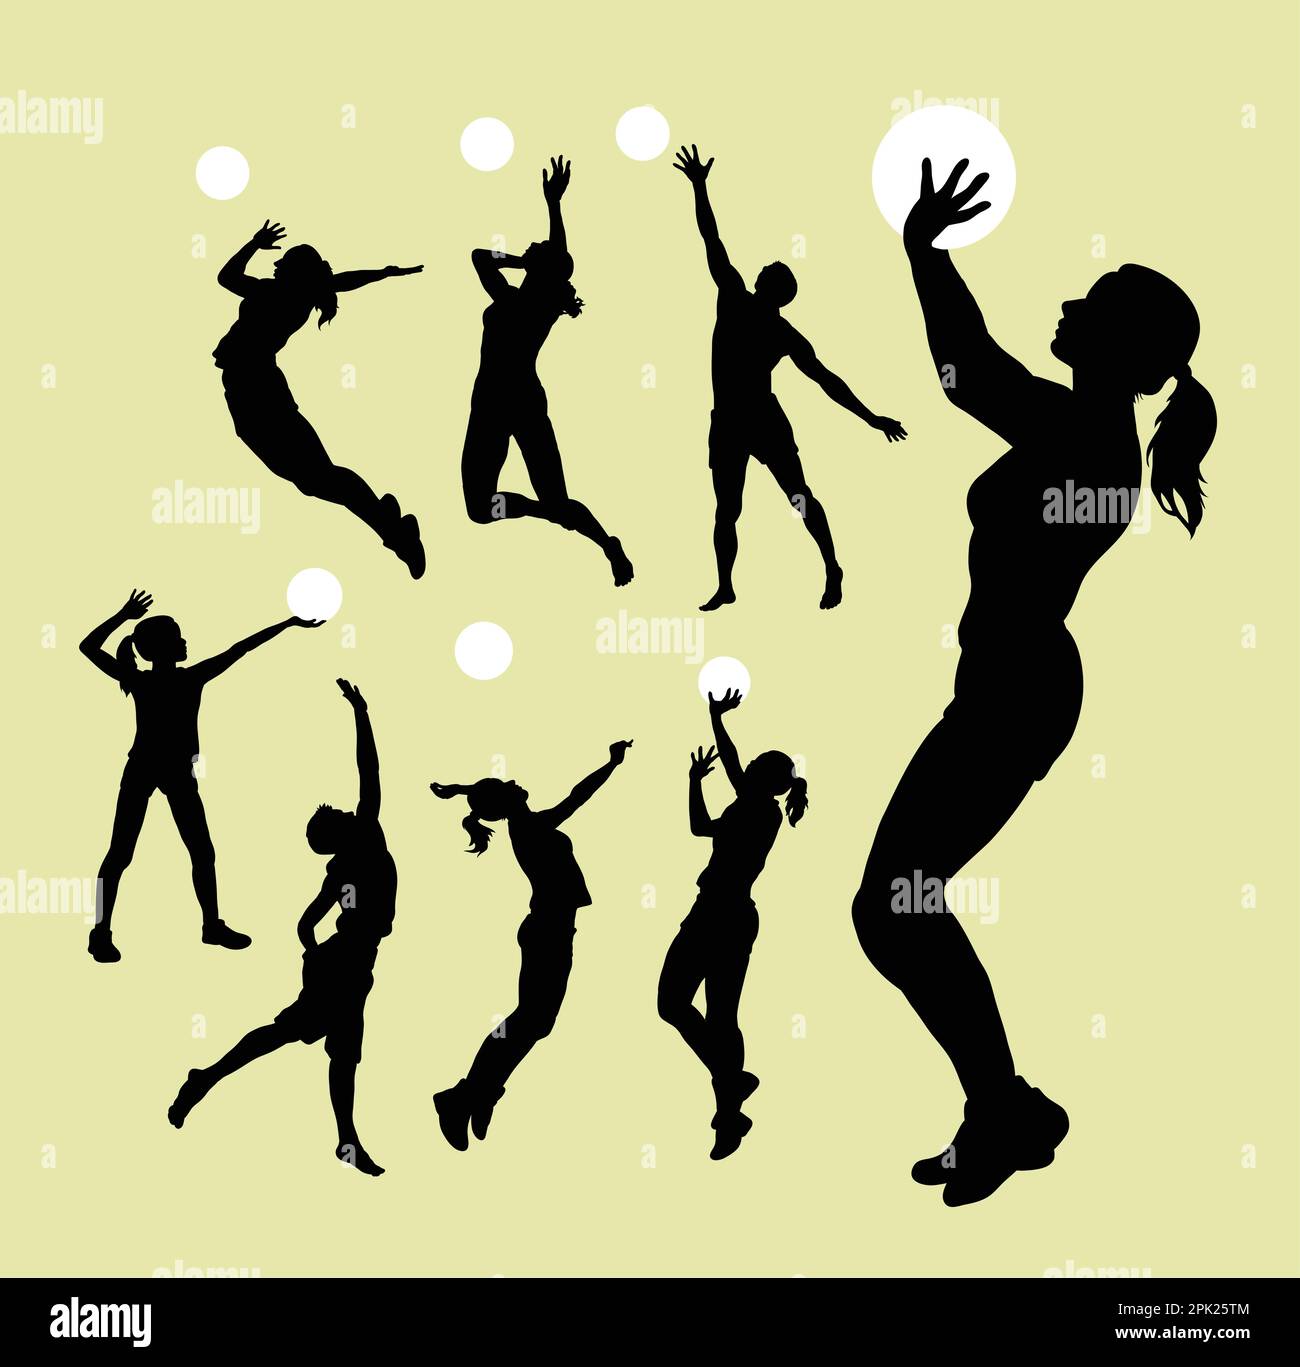 Volleyball sport silhouettes Stock Vector